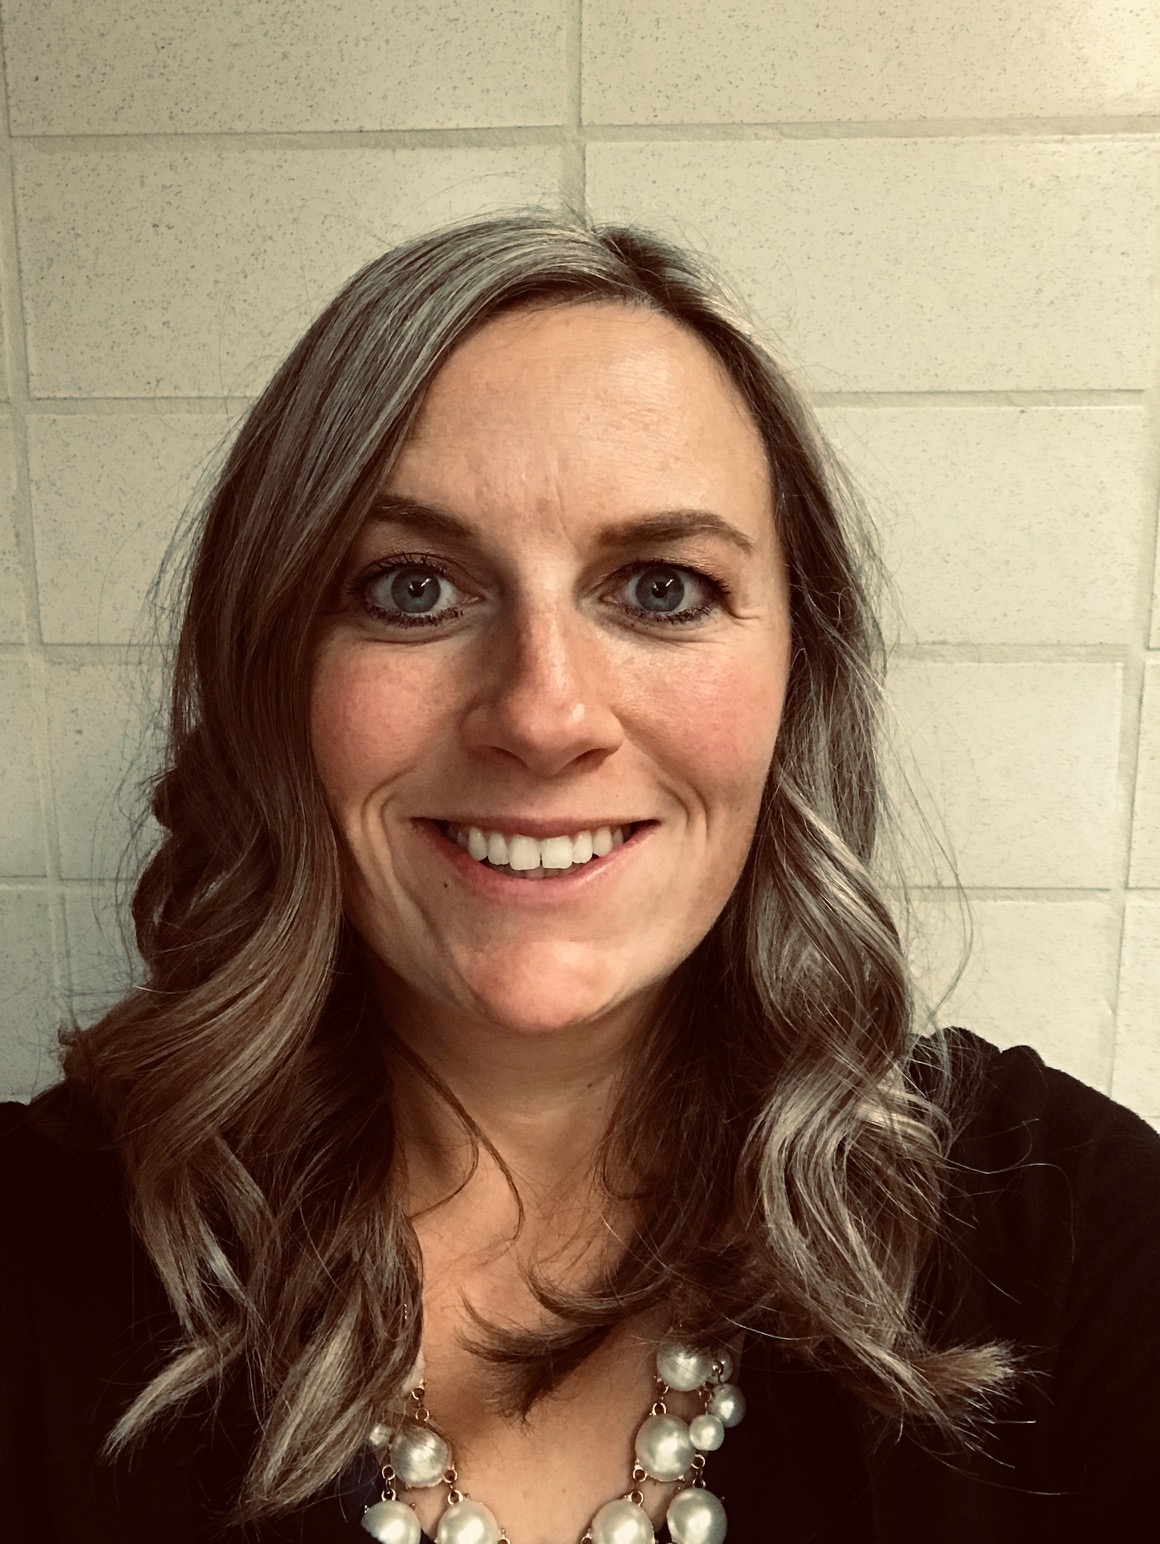 Angie Cruzen Food Shelf Executive Director of Gather and Grow Waconia Food Shelf and and Mental Health Peer Support Specialist at Gather & Grow